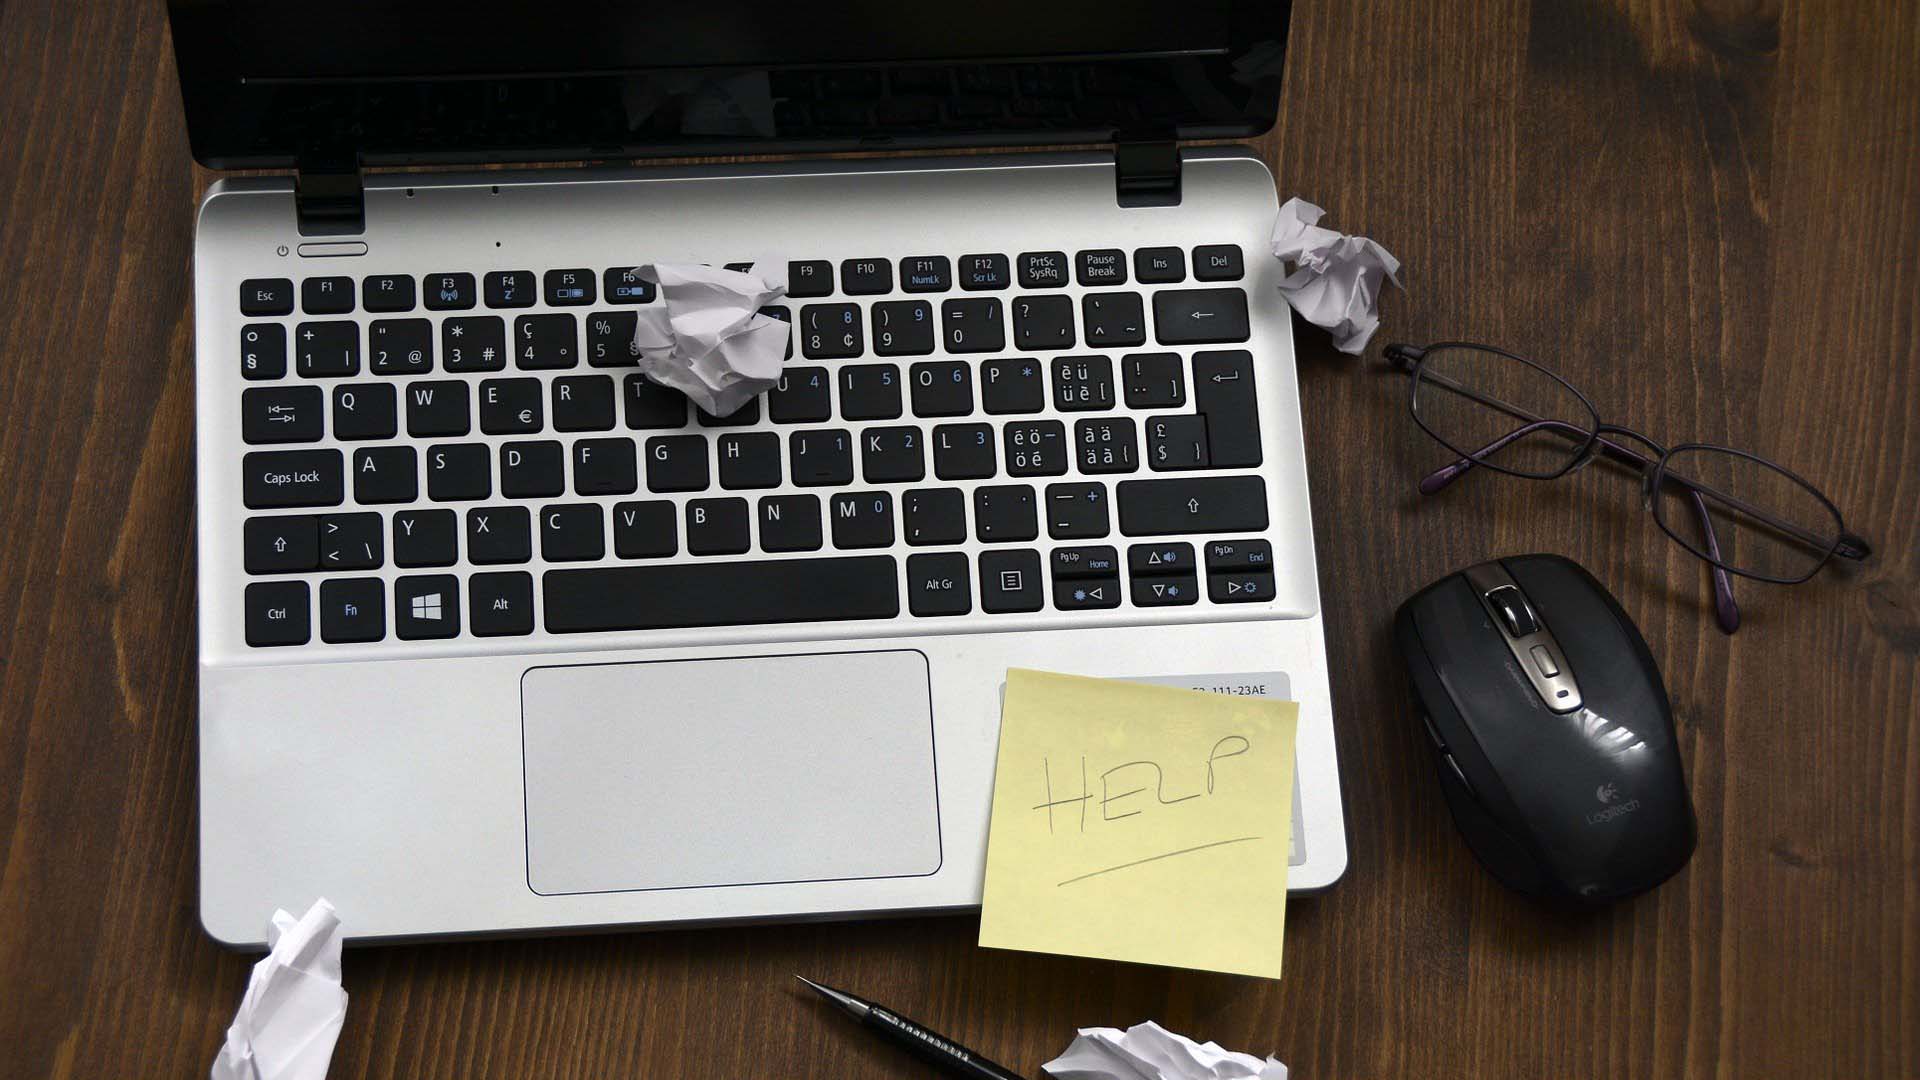 A laptop with 'Help' written on a post-it note which is stuck to the laptop.